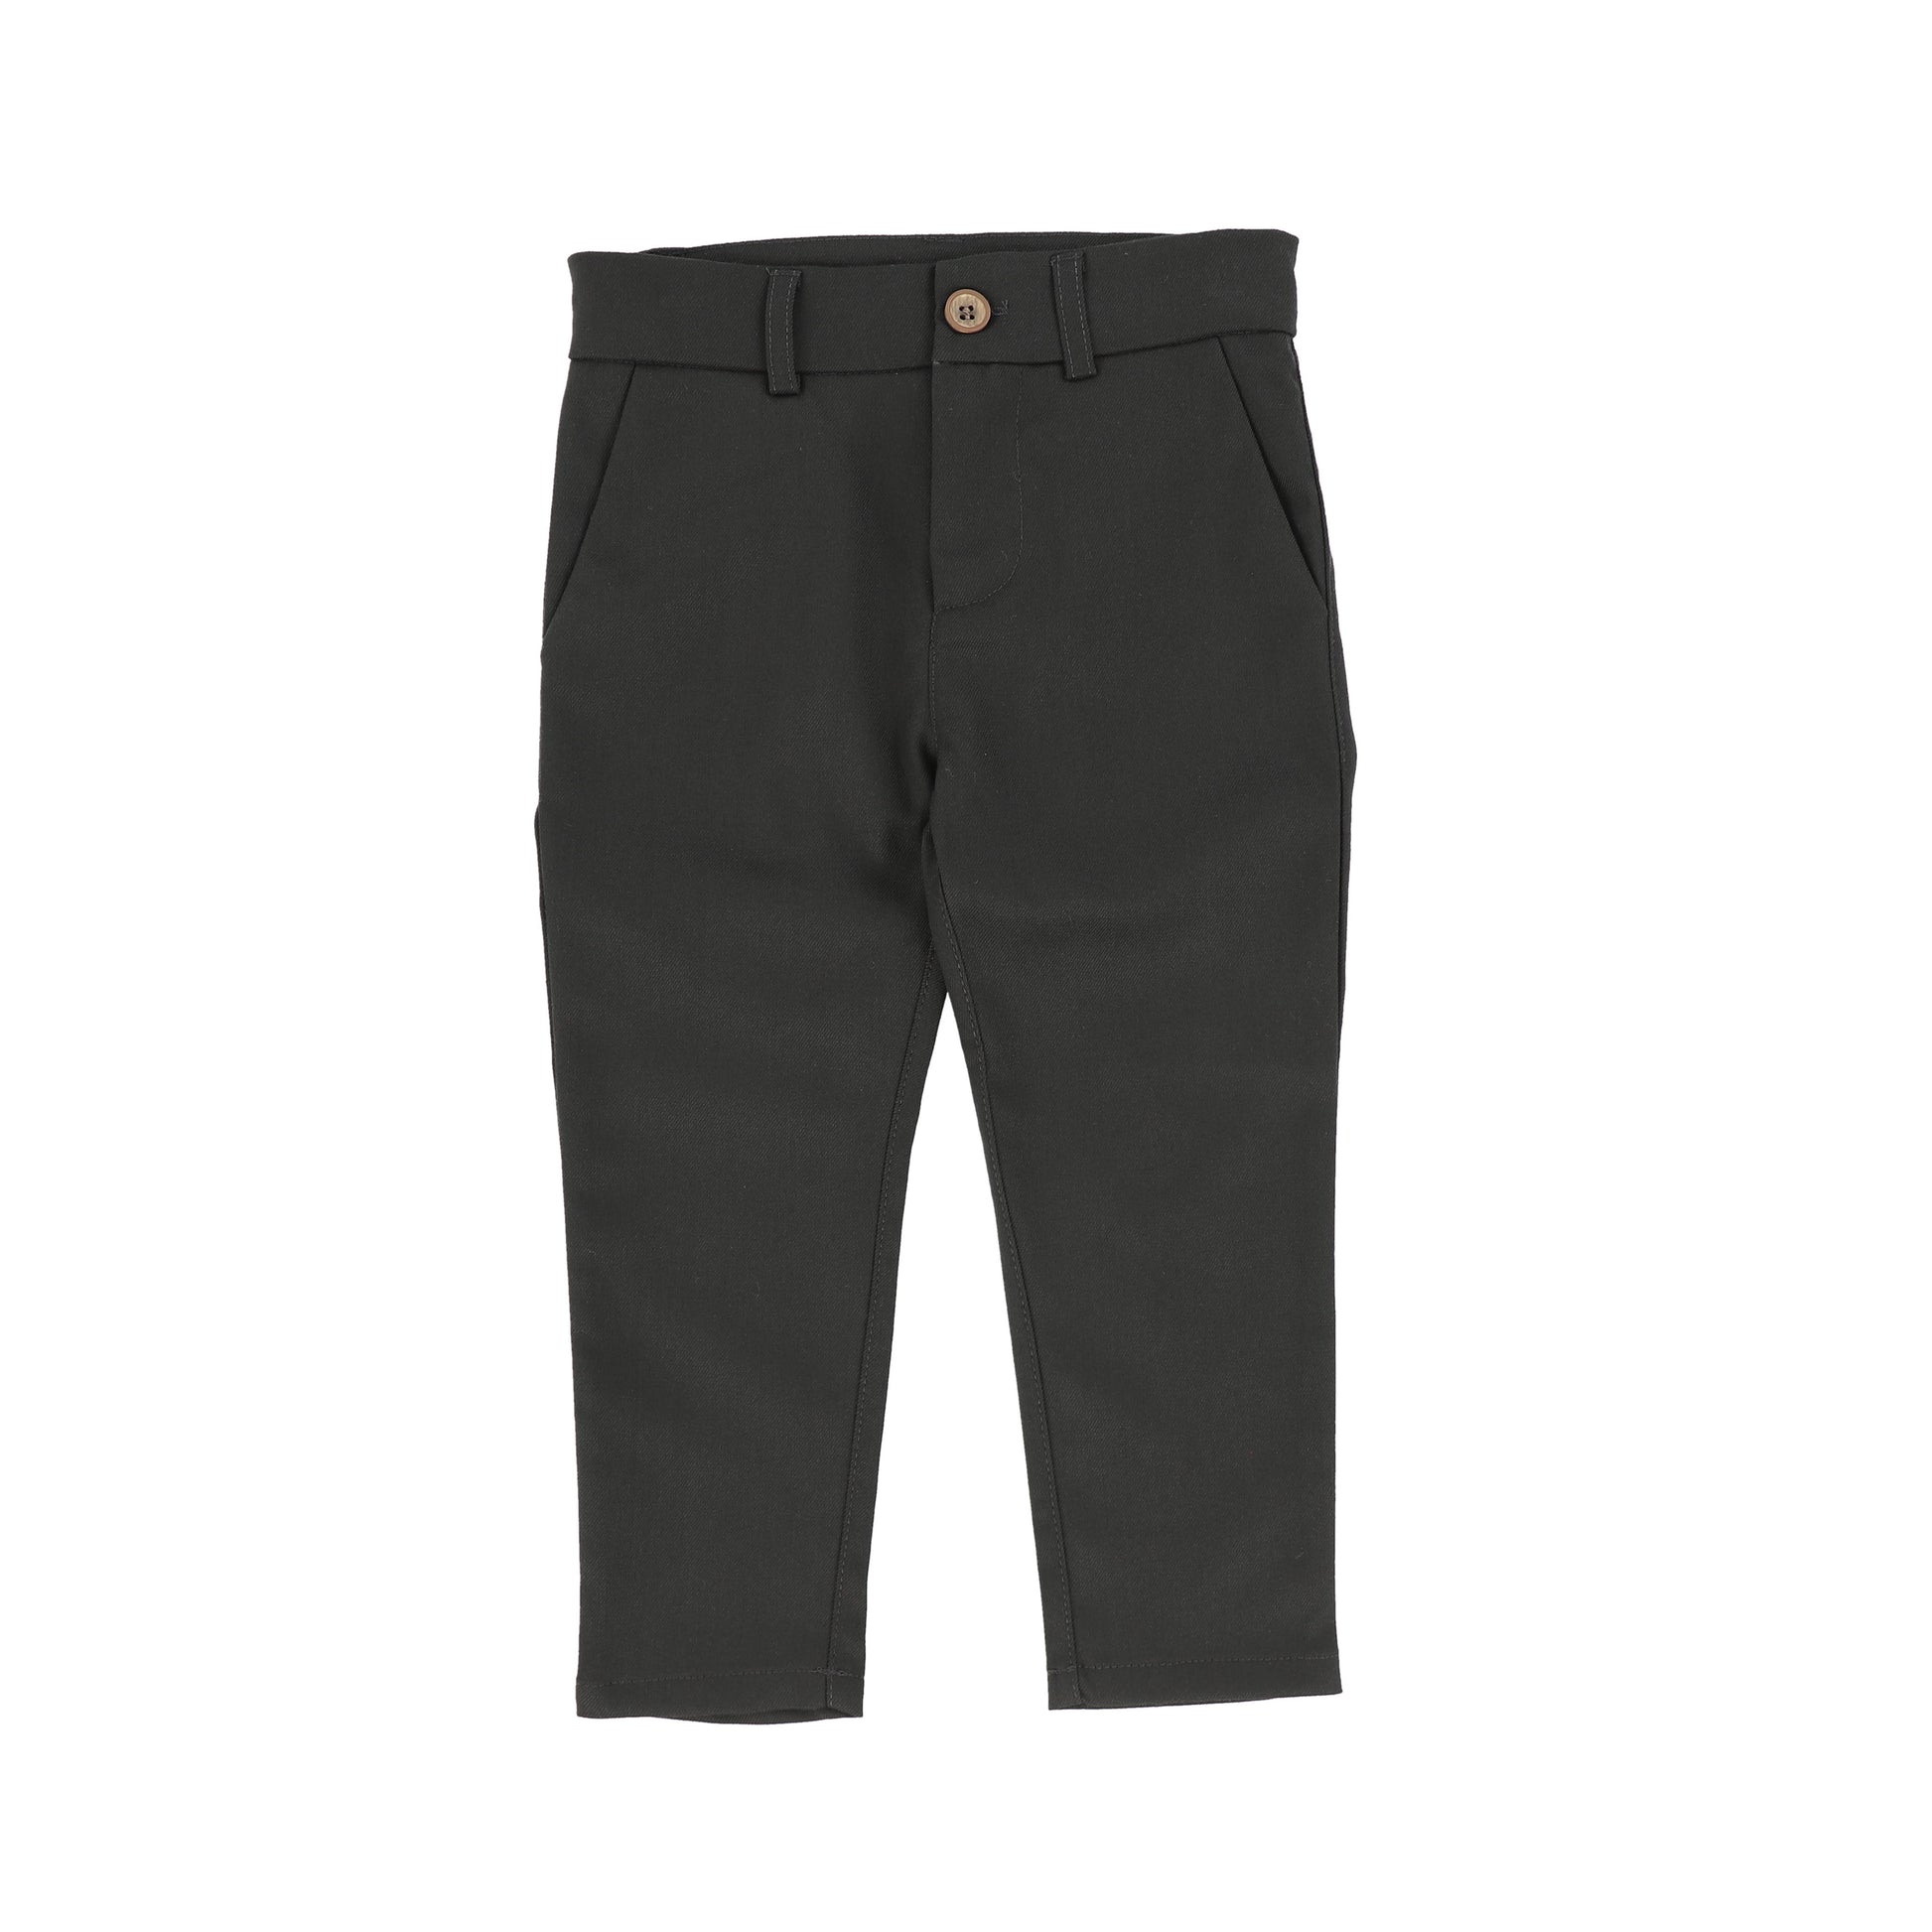 Hunter Green Slim Fit Pants | Size 8 by One Child